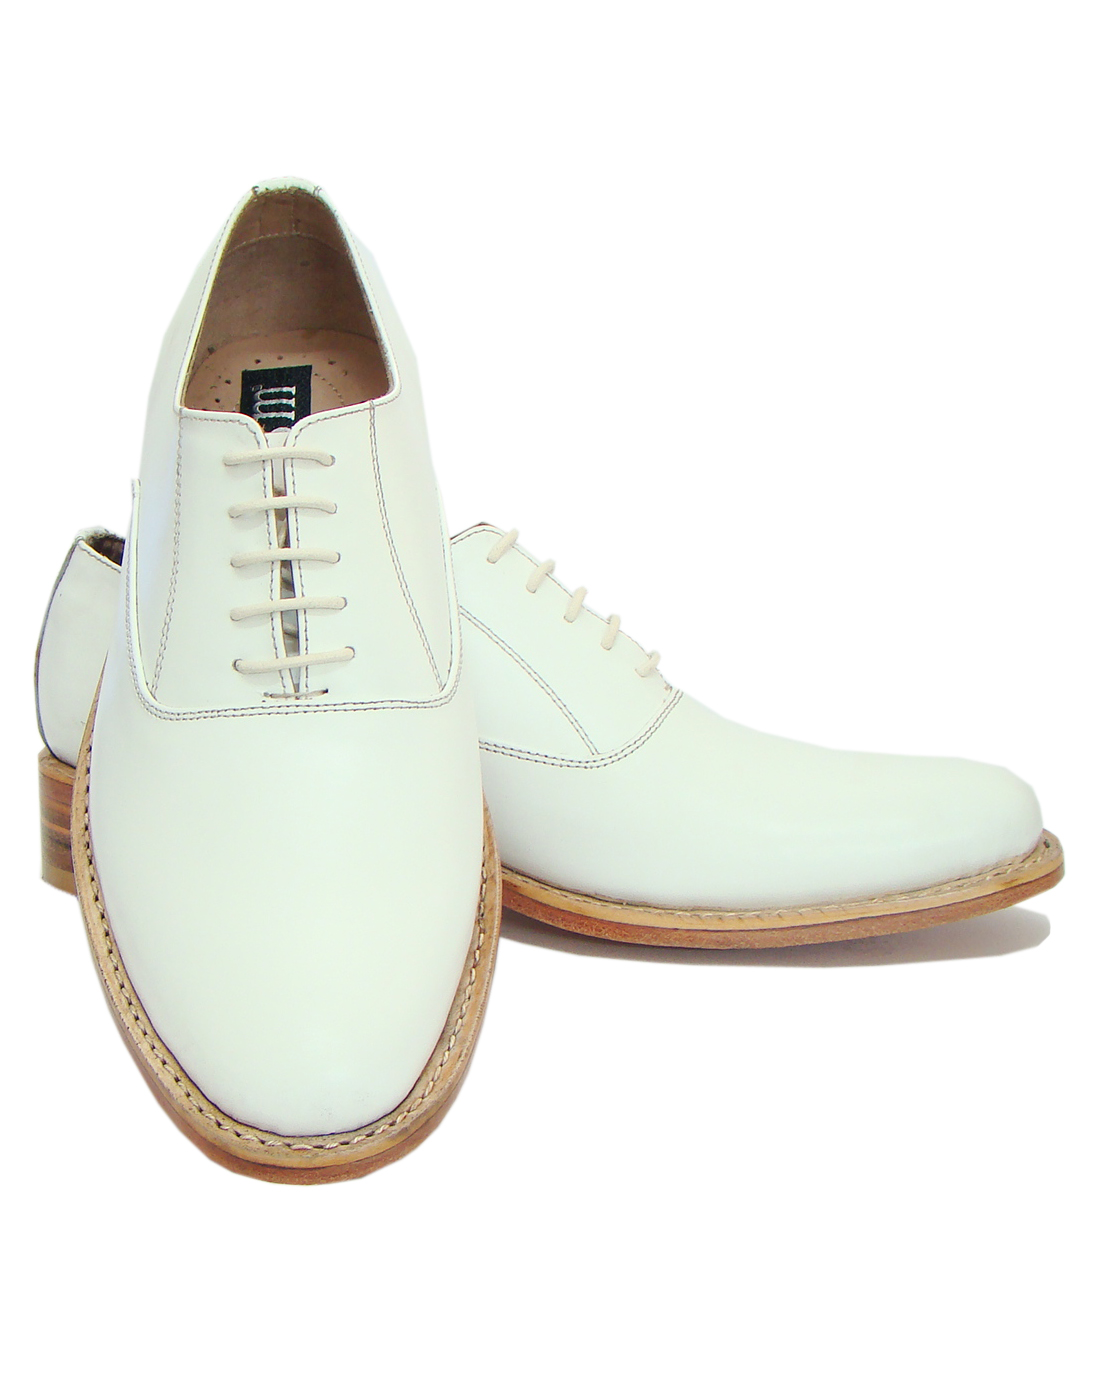 Navy Uniform White Derby Leather Shoes by ASM.